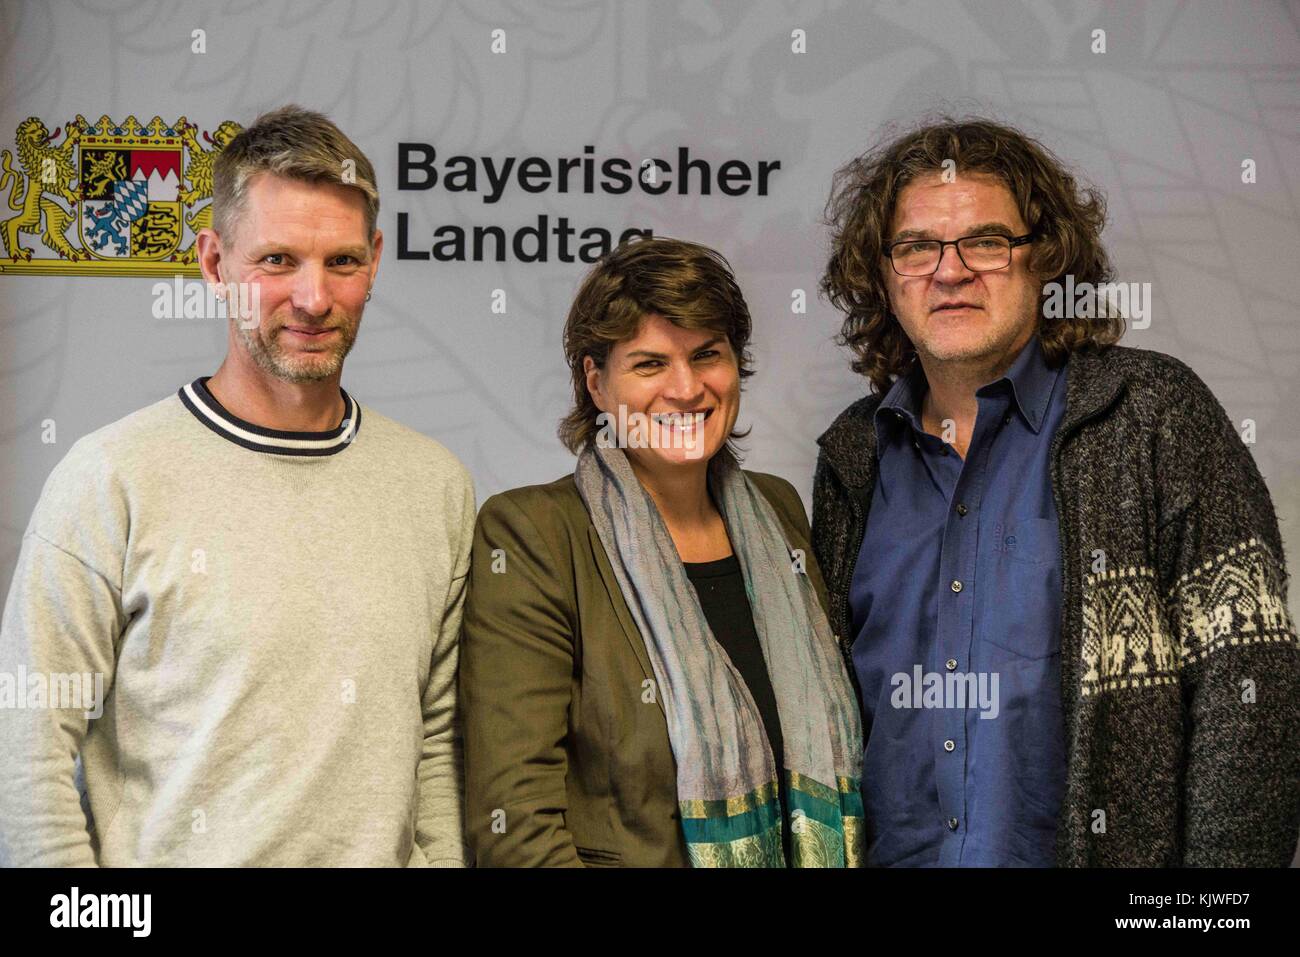 Munich, Bavaria, Germany. 27th Nov, 2017. (L-R jE Schulz, Claudia Stamm, Michael Stenger) Claudia Stamm of the Bavarian Parliament held a press conference with JE Schulz of Herzogsaegmuehle and Michael Stenger of the Schlau-Schule regarding the so-called 3 2 rules for refugees that states 3 years of training, 2 years of work experience. Based on more than 14,000 job vacancies, Stamm and the panel regards refugee training as profitable for German society as well as for the refugees. However, numerous hurdles are in place virtually guaranteeing that the refugees will not be able to integ Stock Photo